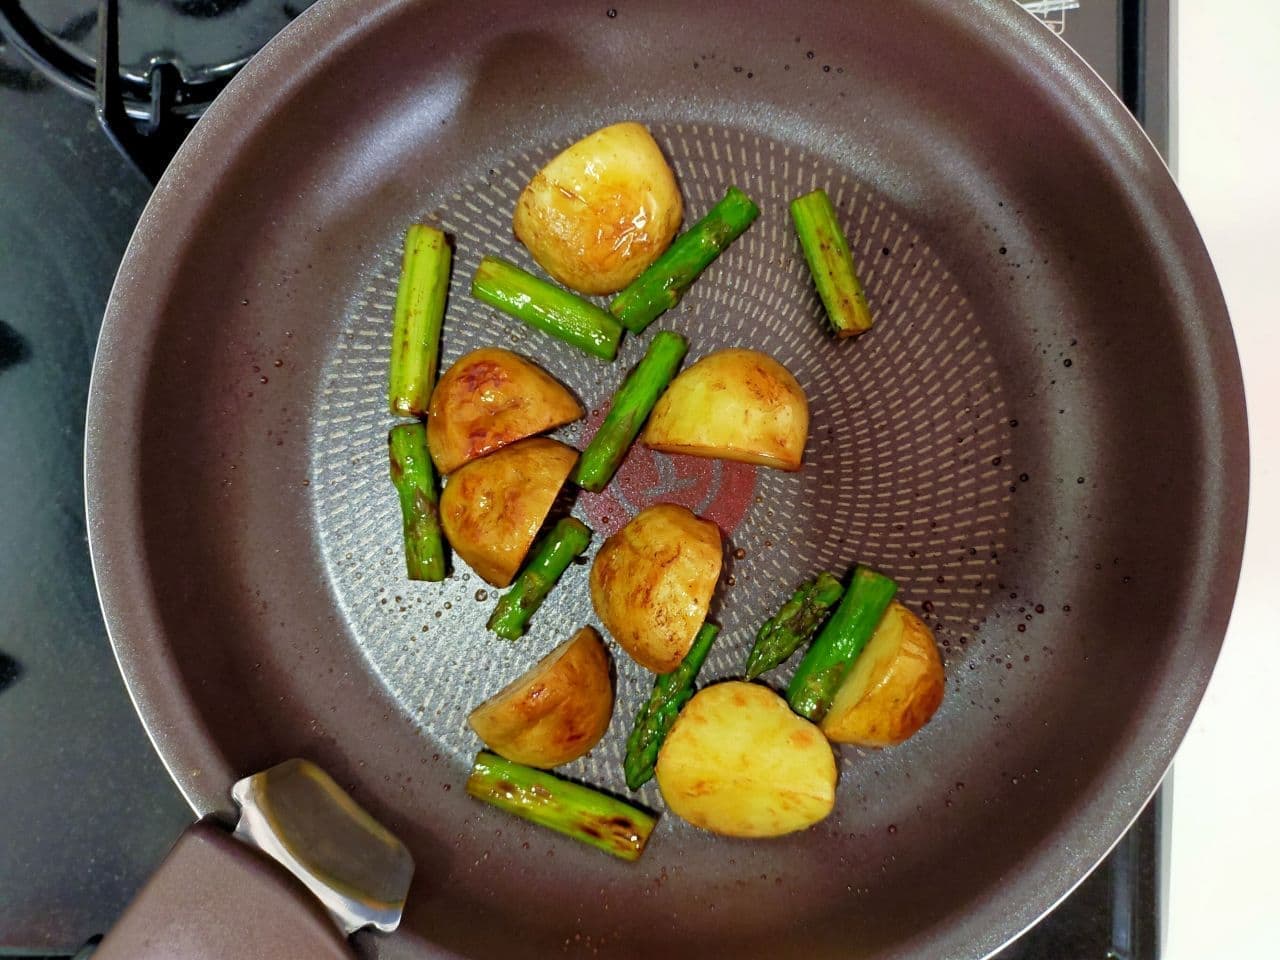 "New potato and asparagus stir-fried with butter" recipe